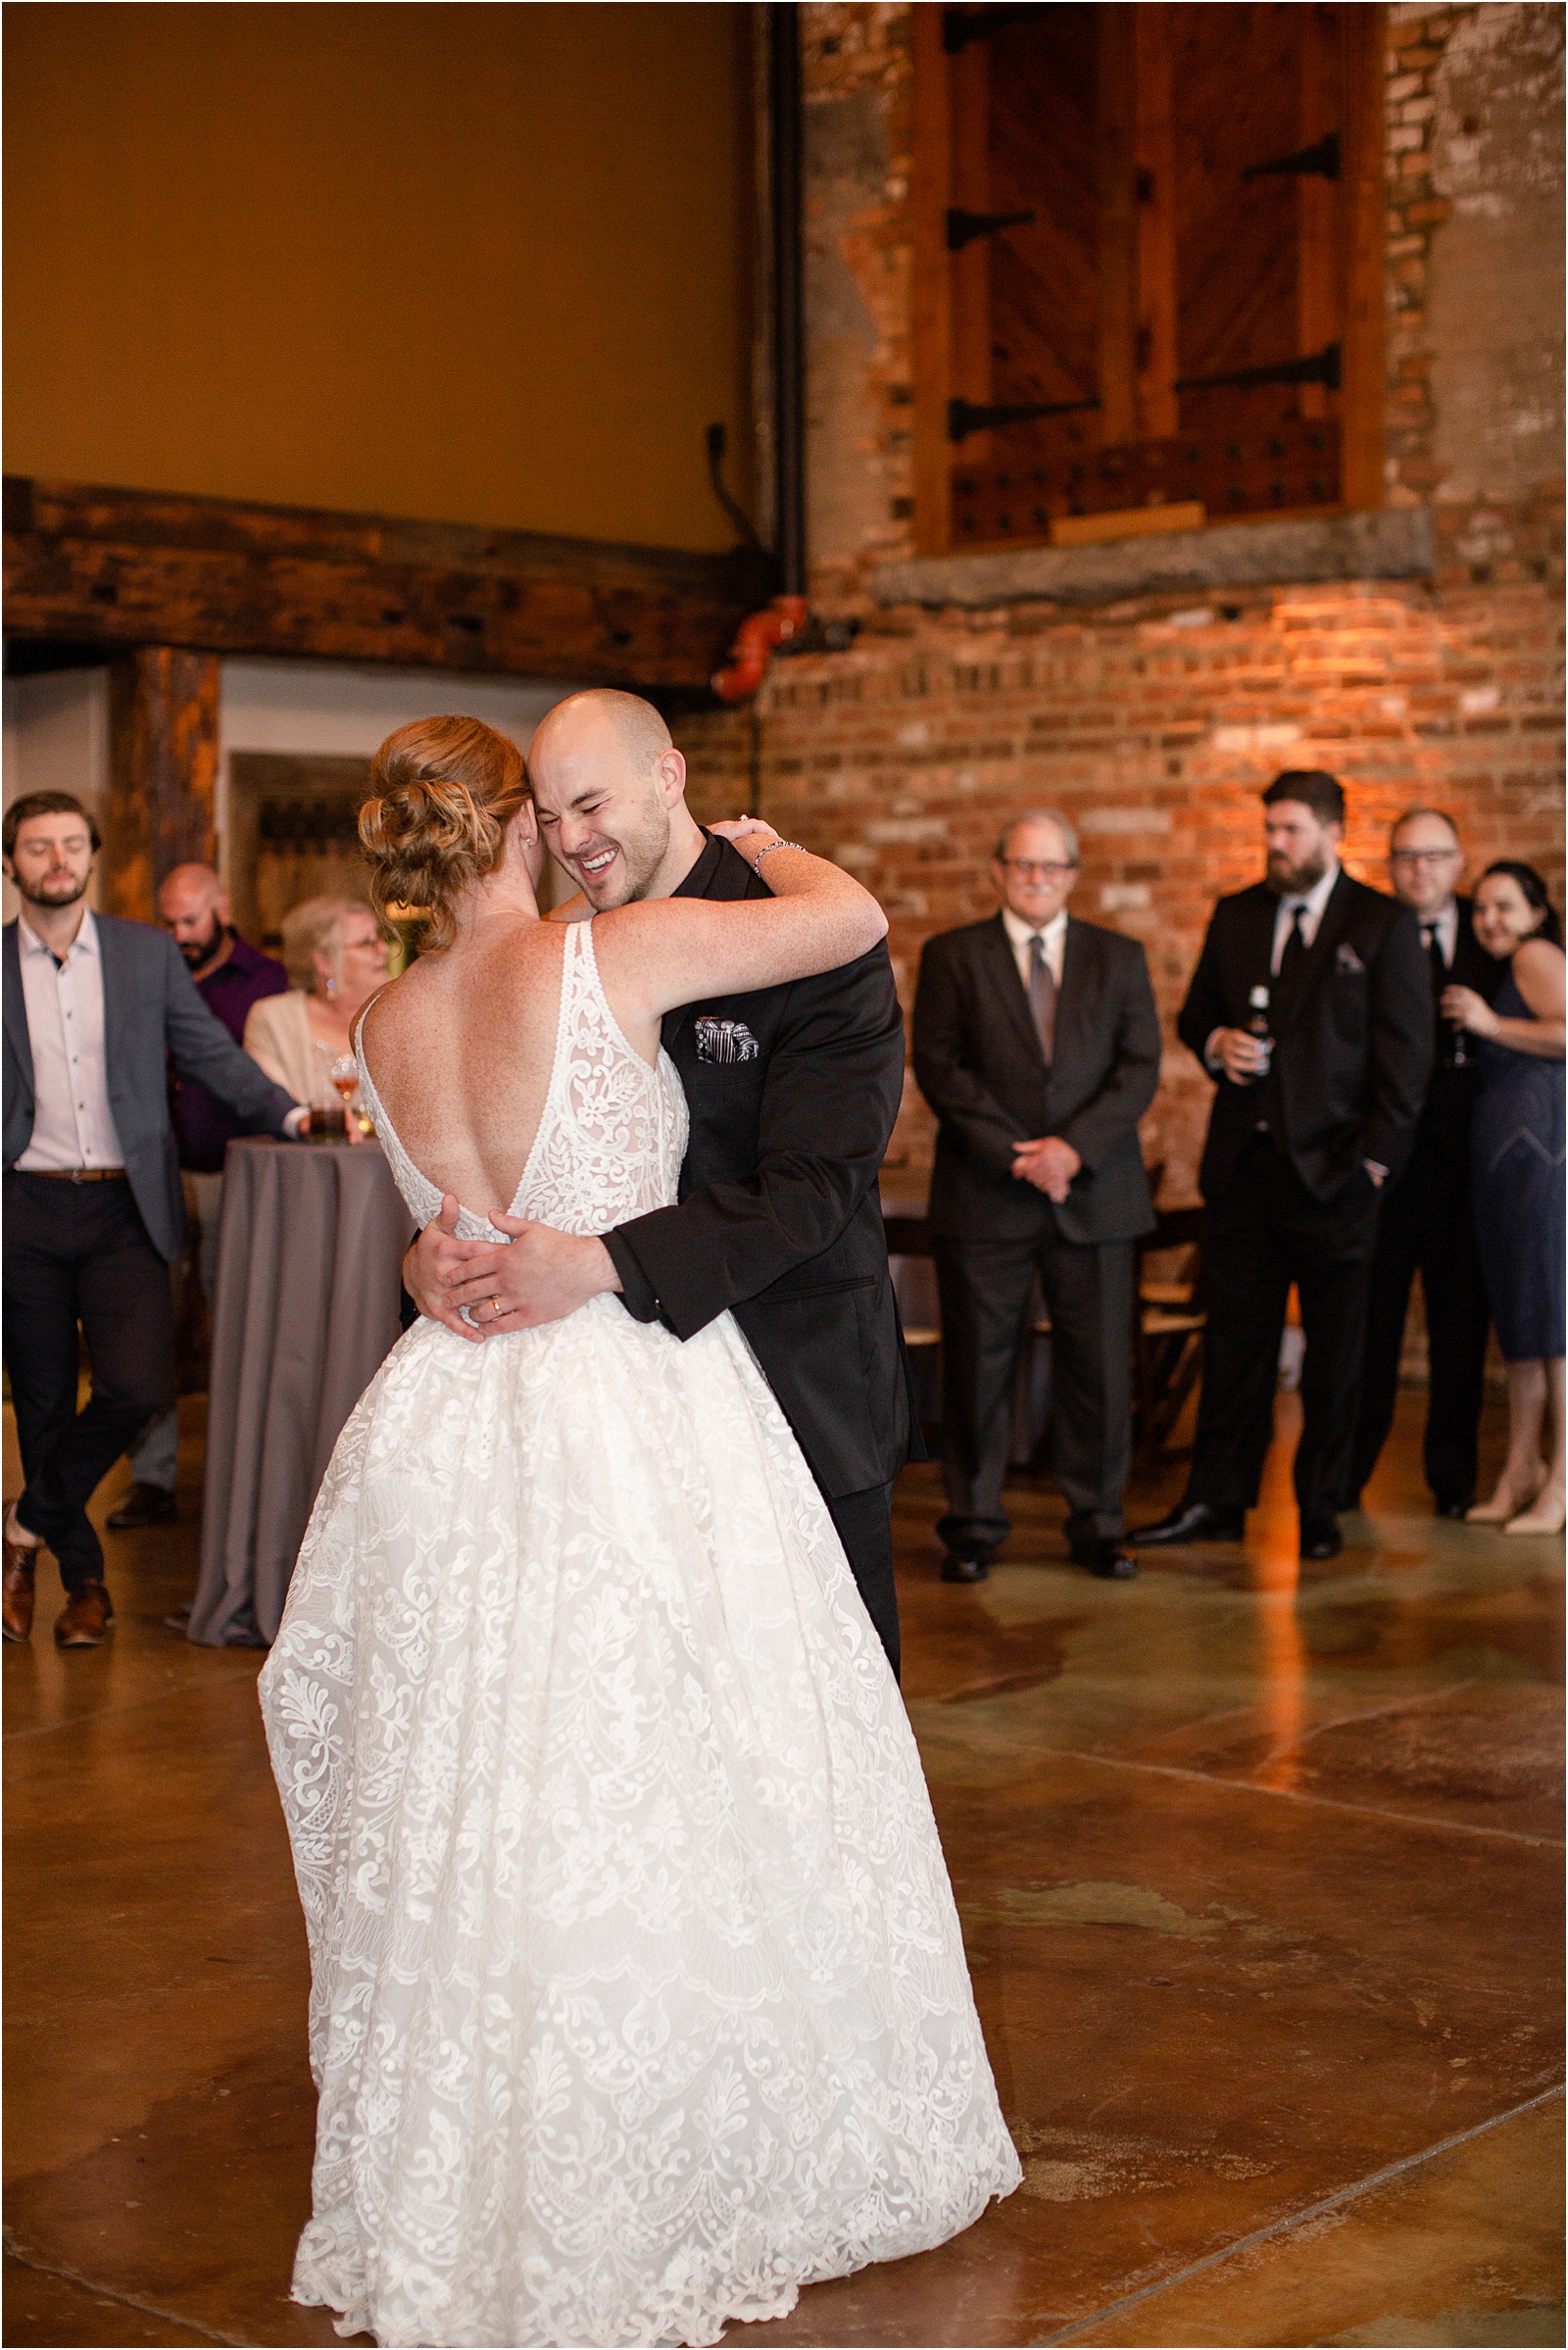 Groom smiles as he dances with his new bride